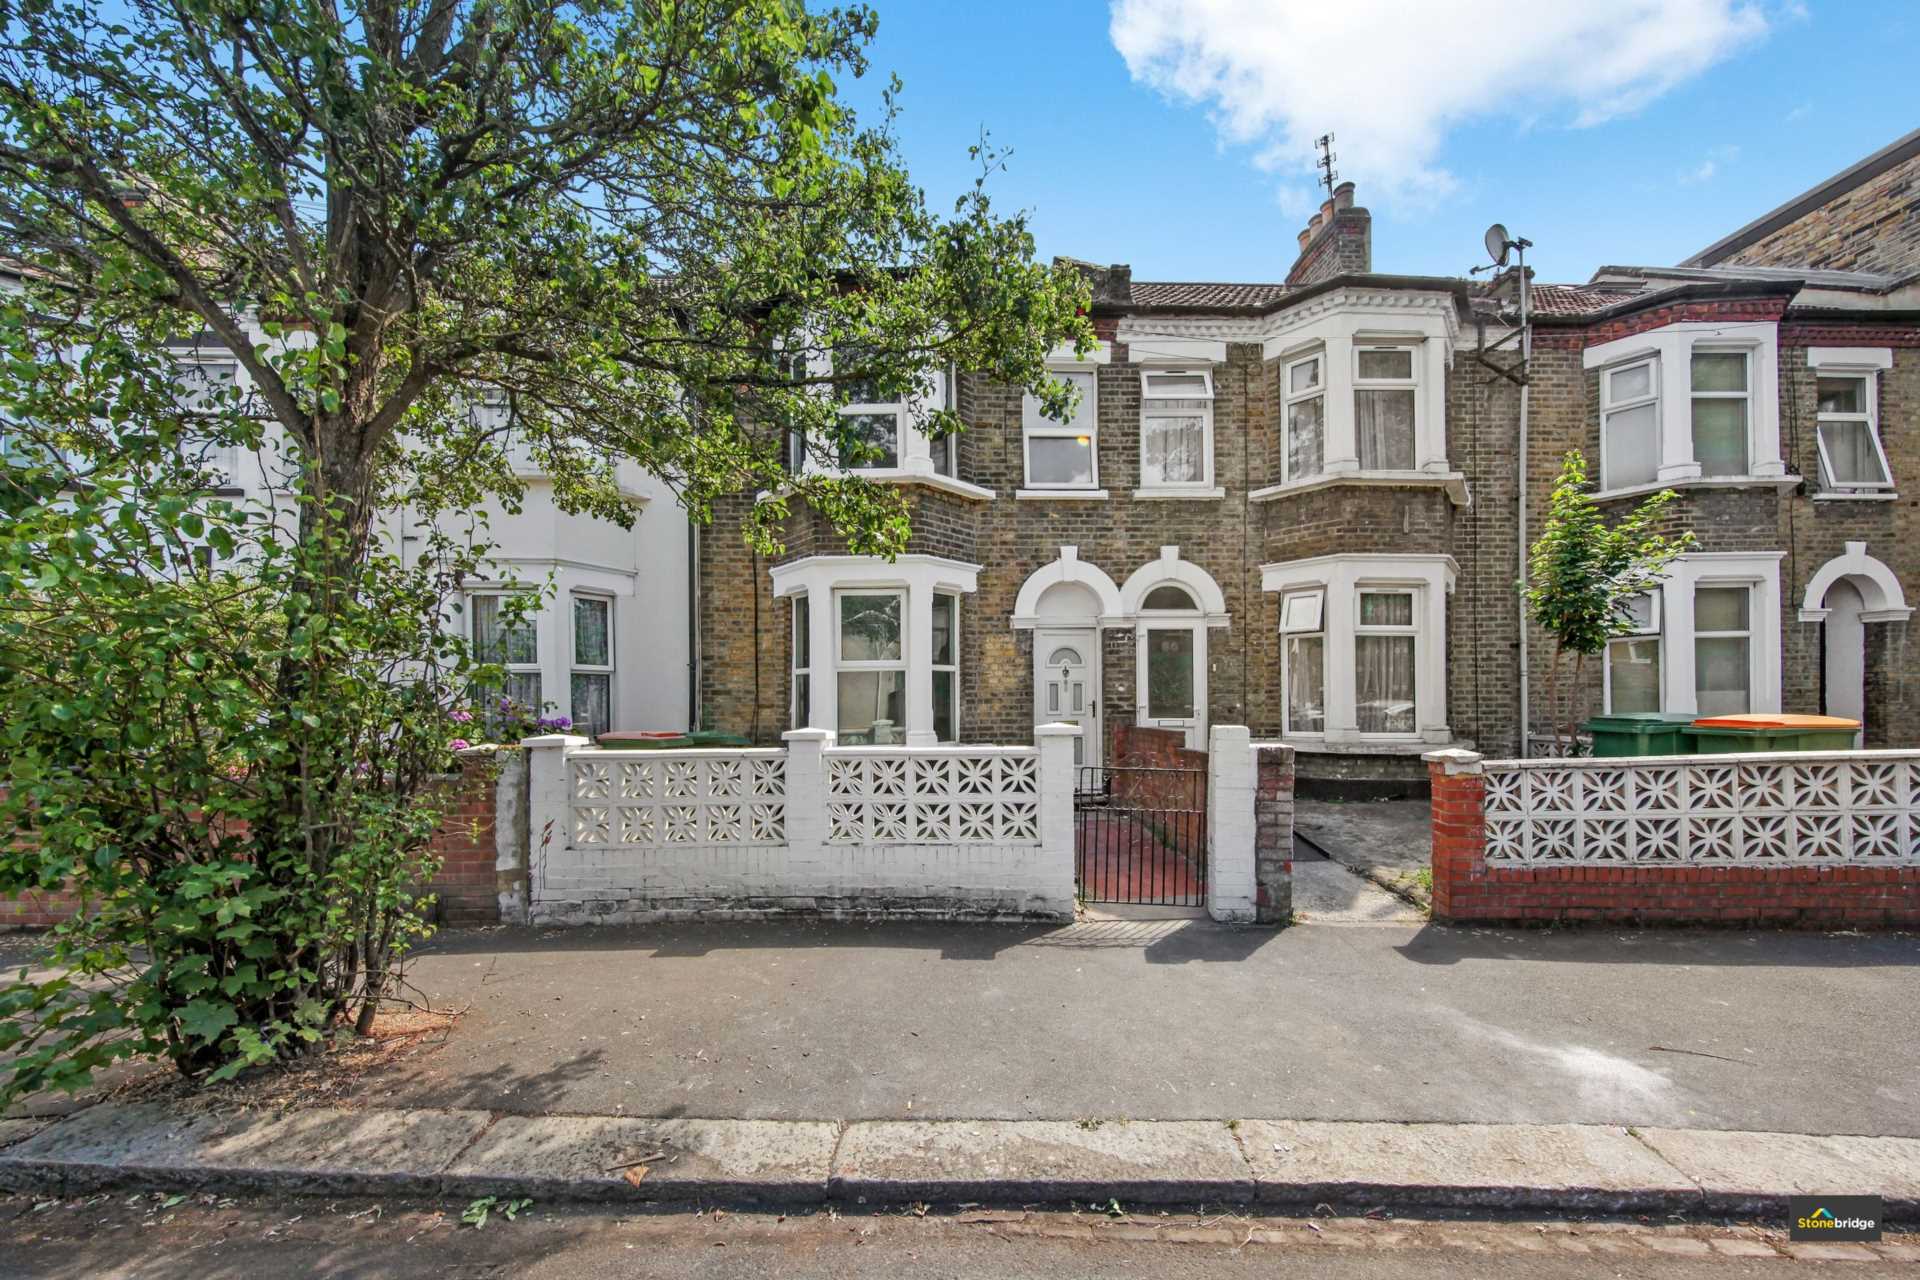 St. Georges Road, Forest Gate, E7, Image 1